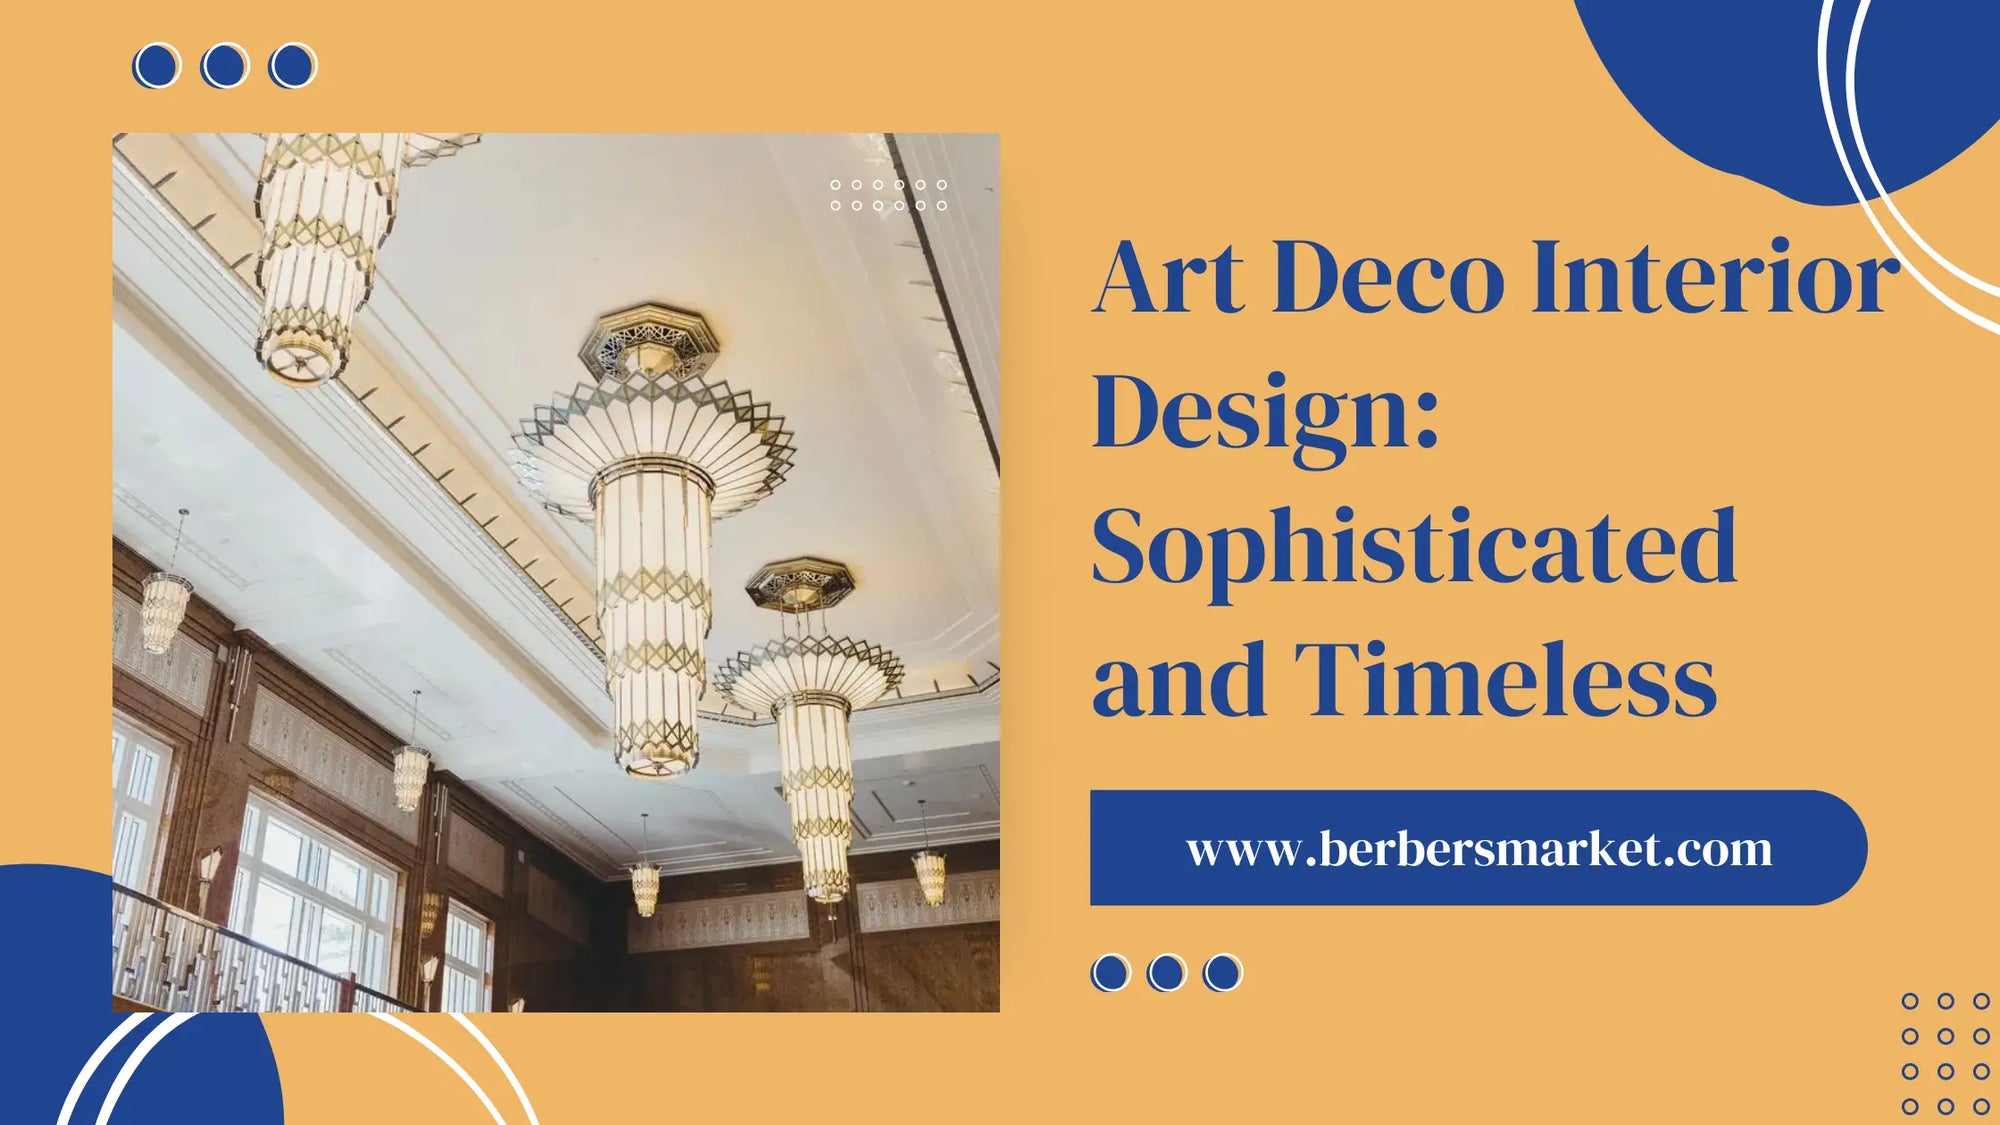 Blog banner talking about: "Art Deco Interior Design: Sophisticated and Timeless" with a picture showing Art Deco lighting Chandelier.